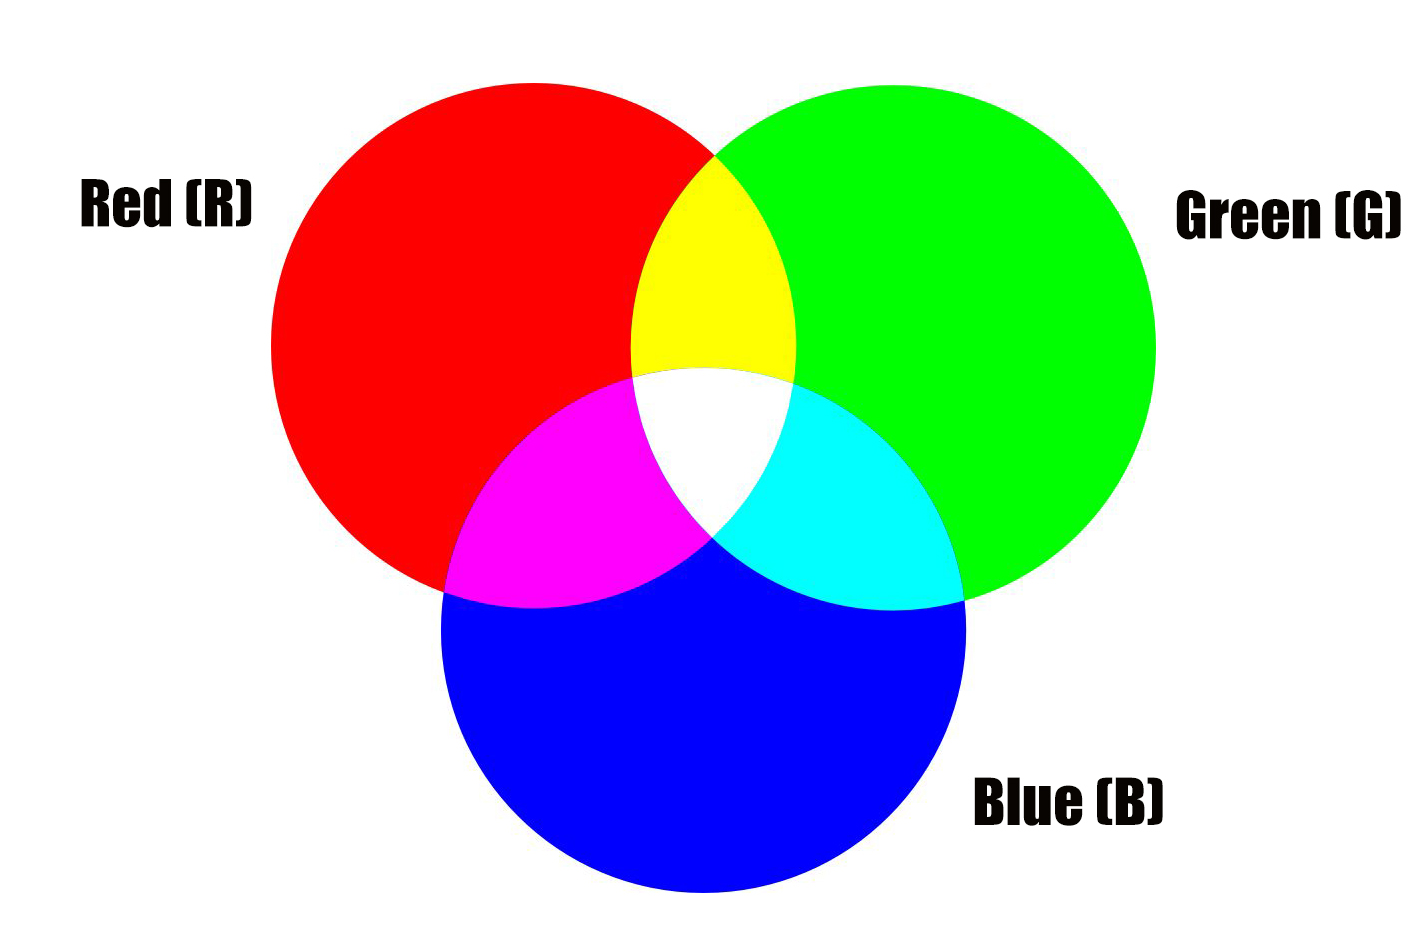 What does RGB stand for in LED lights?